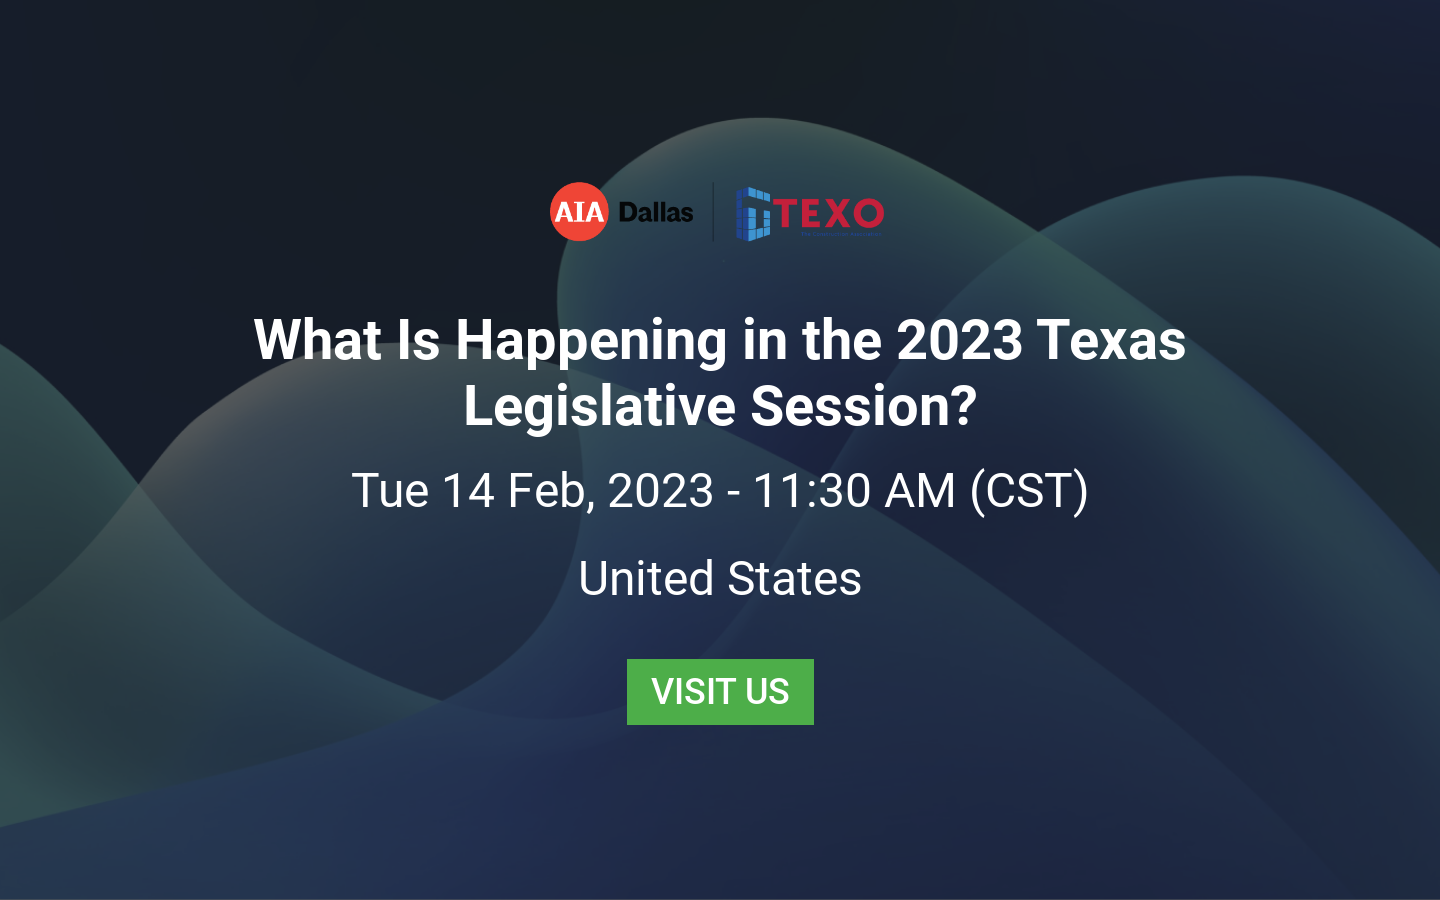 What Is Happening In The 2023 Texas Legislative Session